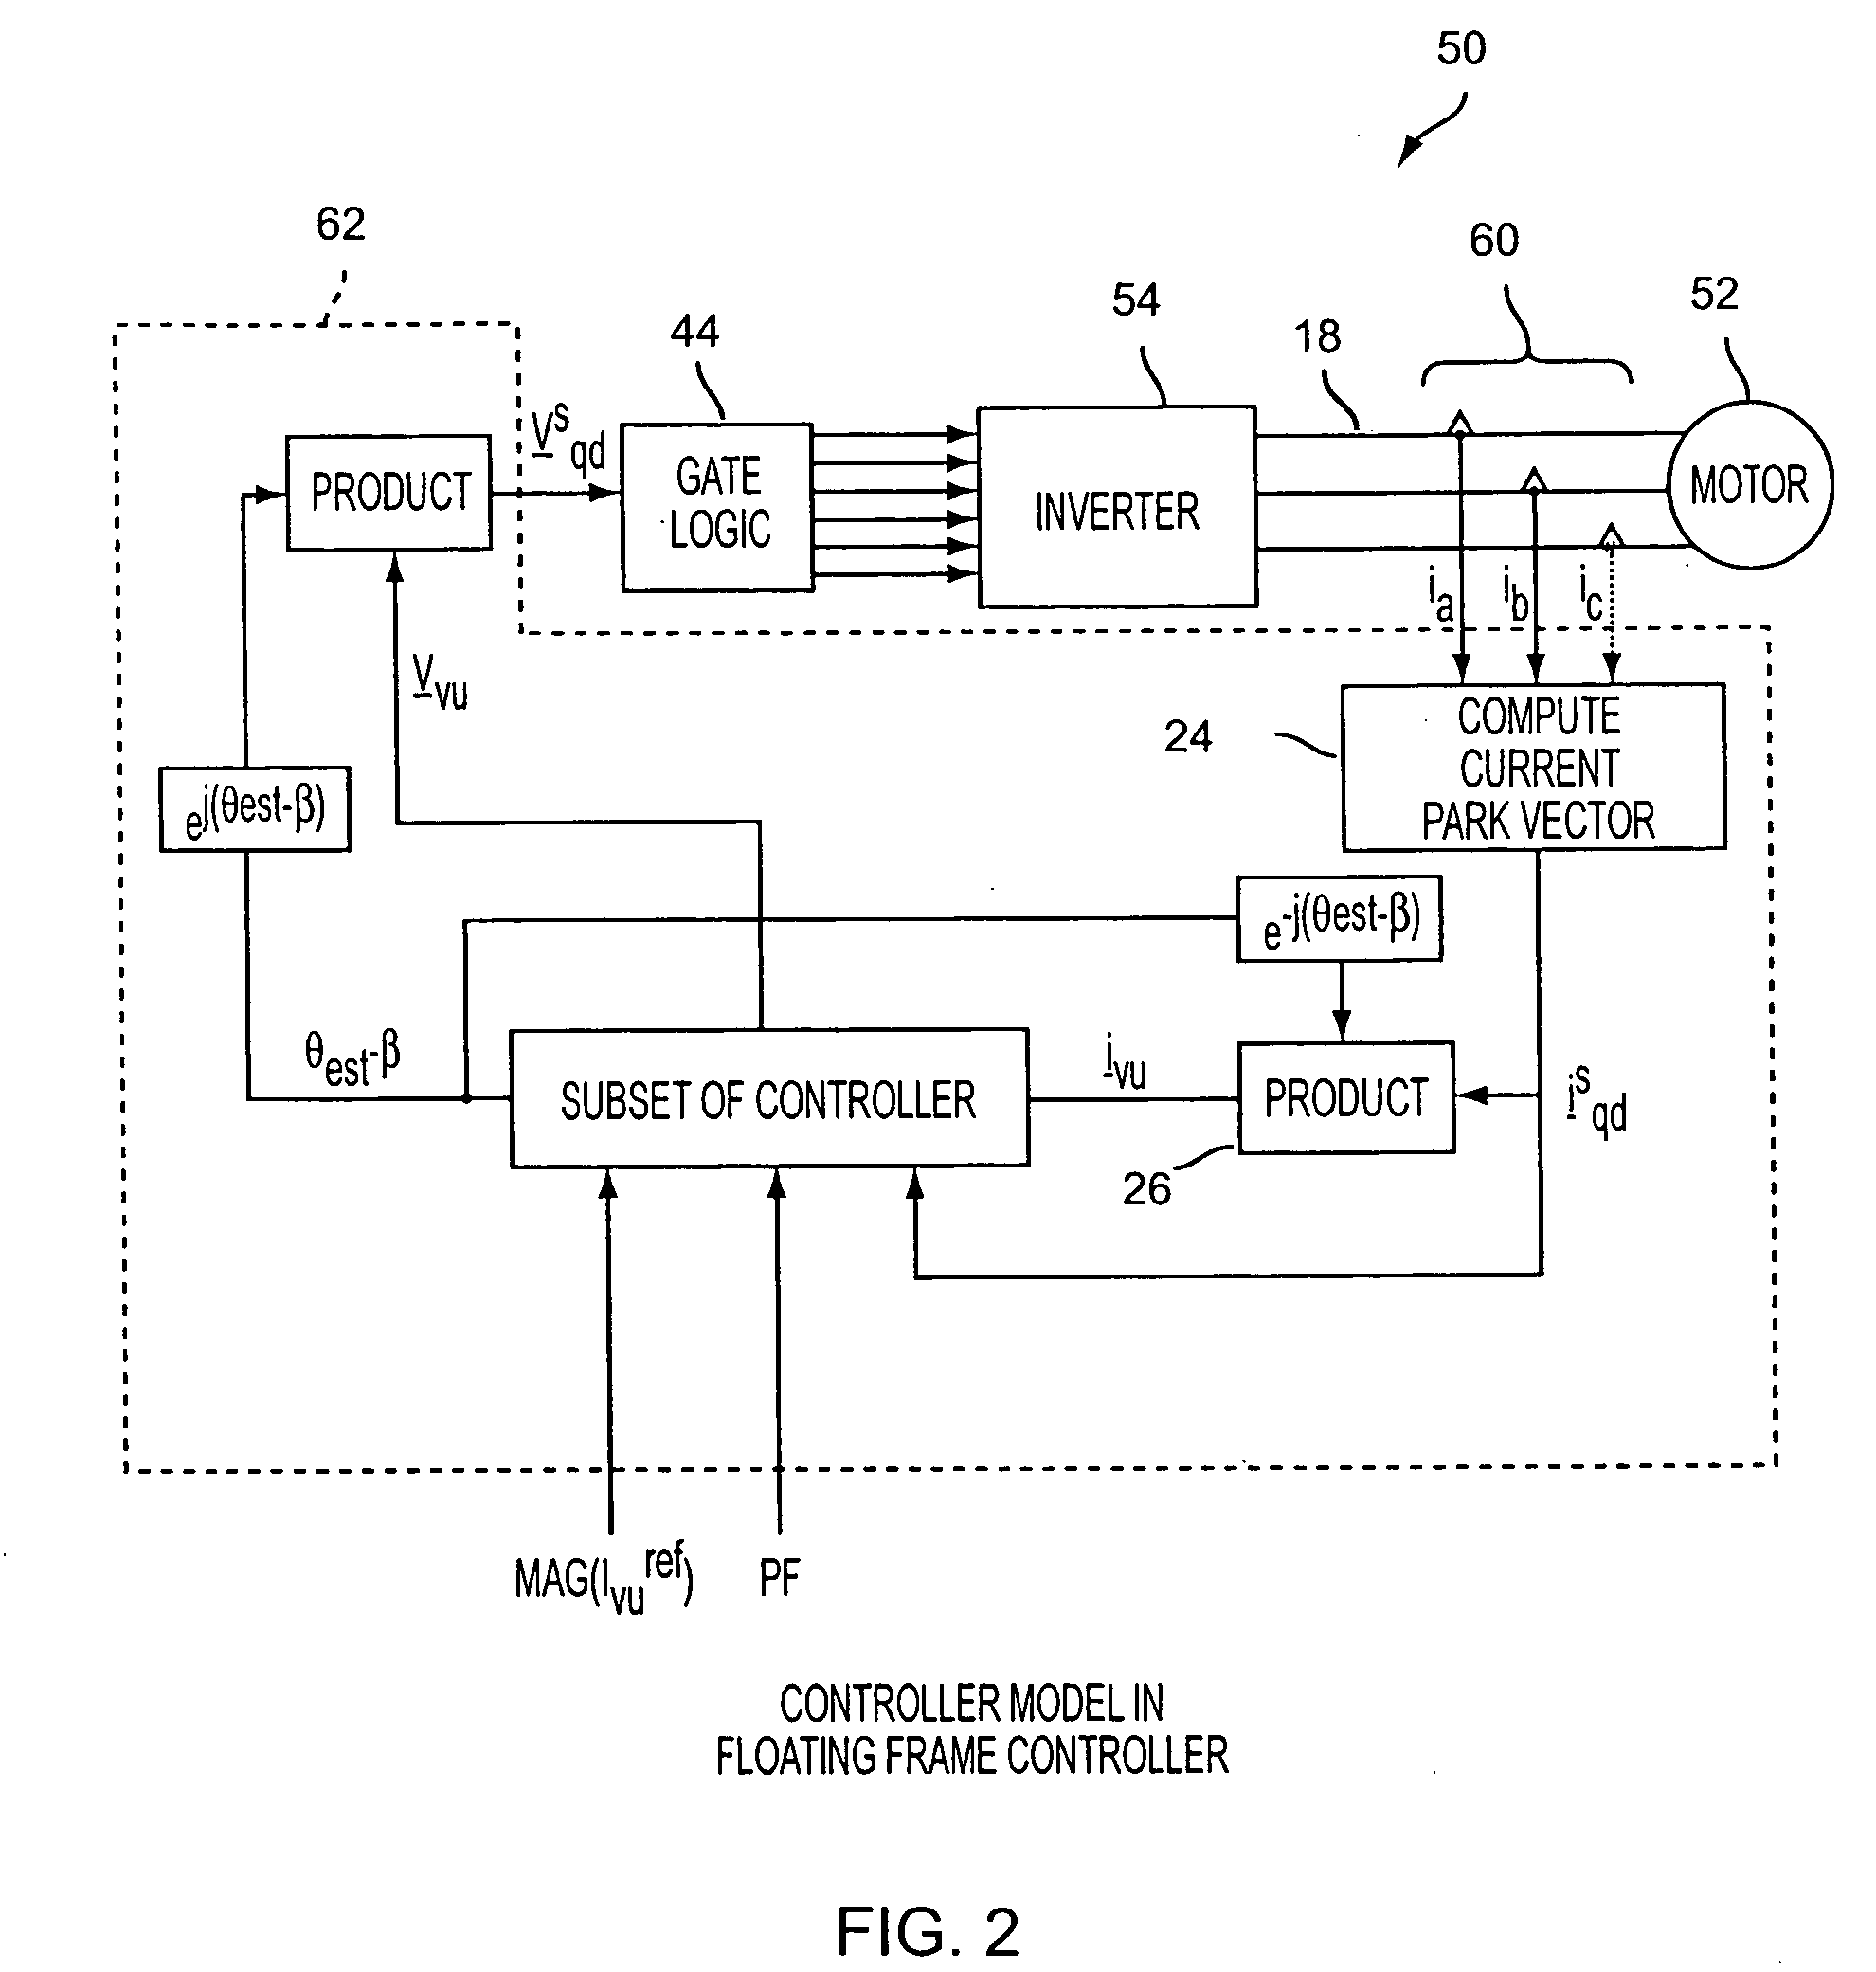 Power factor control for floating frame controller for sensorless control of synchronous machines